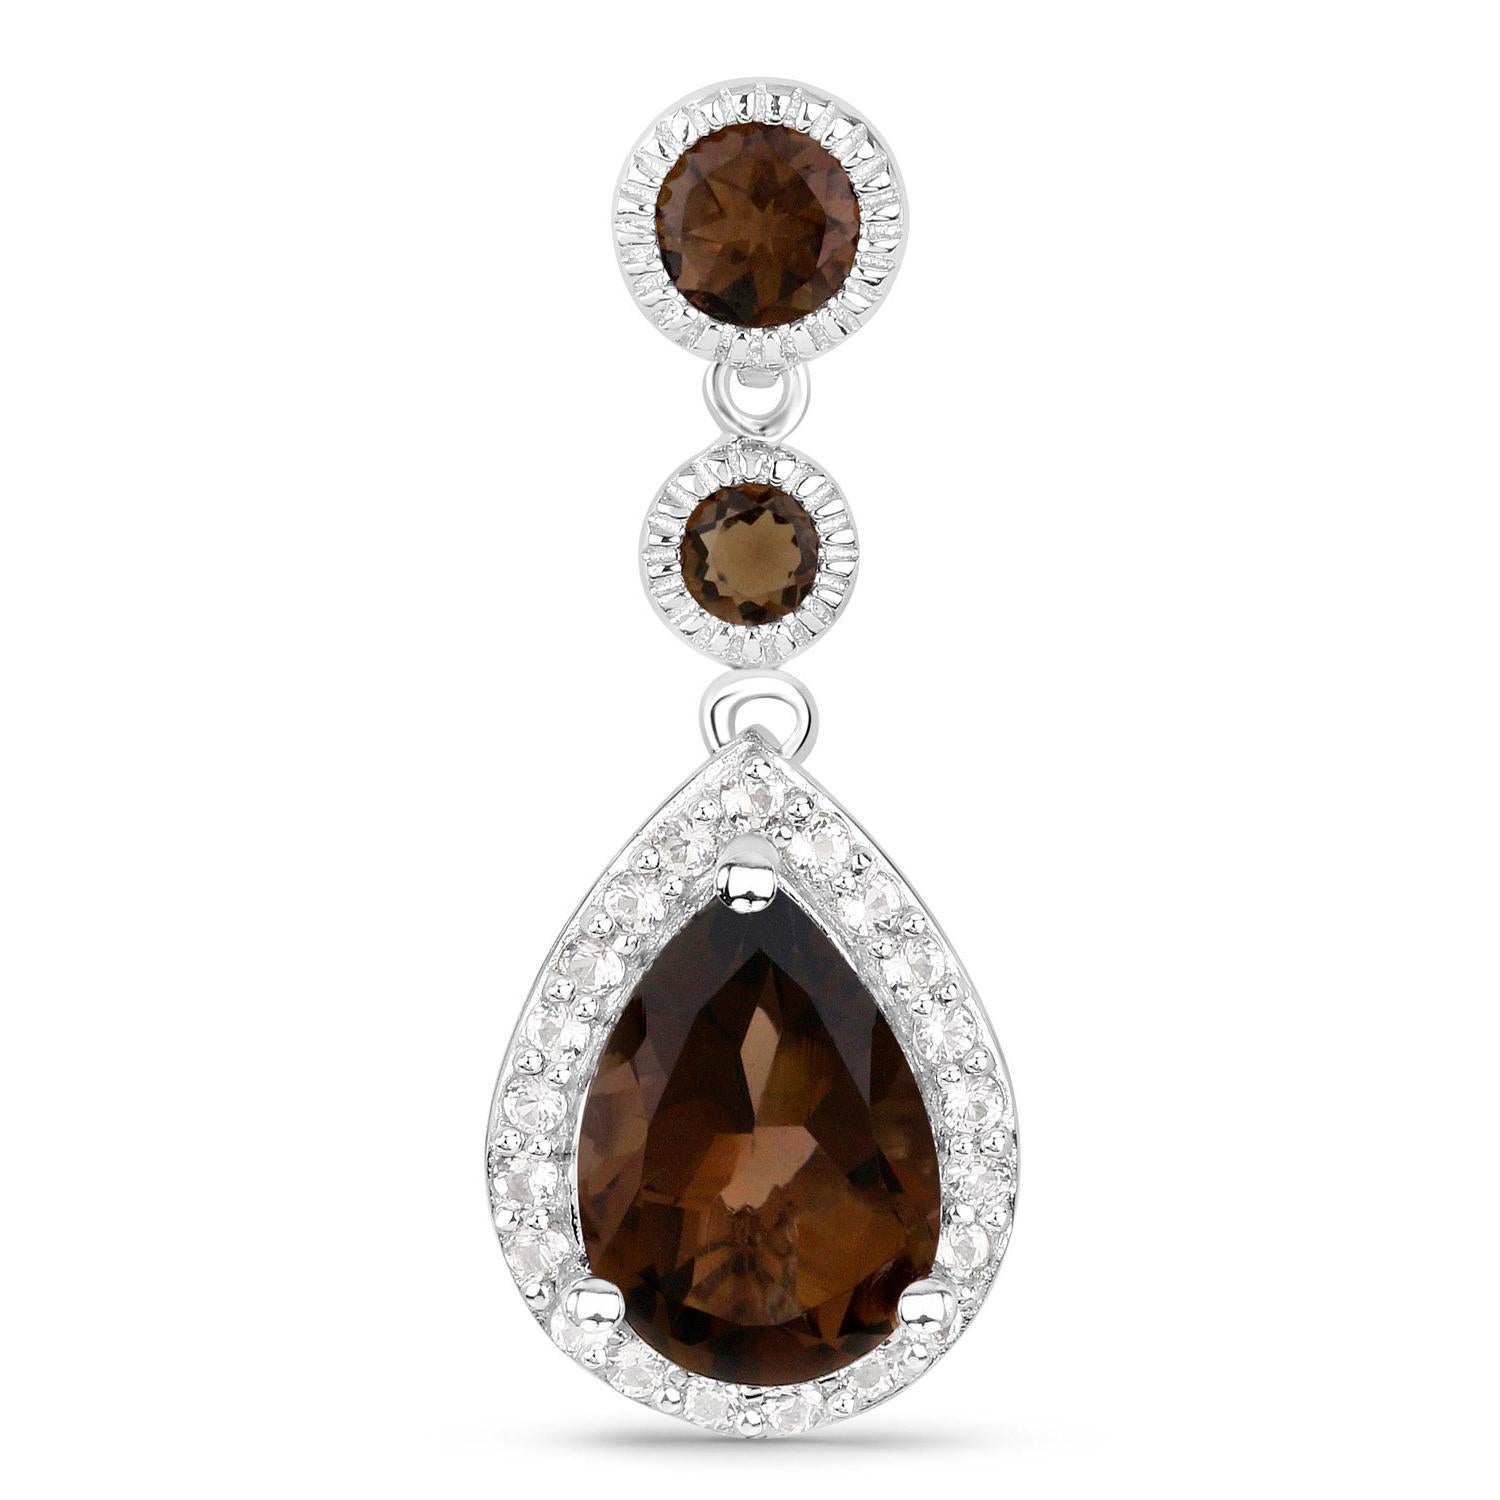 Mixed Cut Smoky Quartz Dangle Earrings White Topaz 7.39 Carats Sterling Silver For Sale